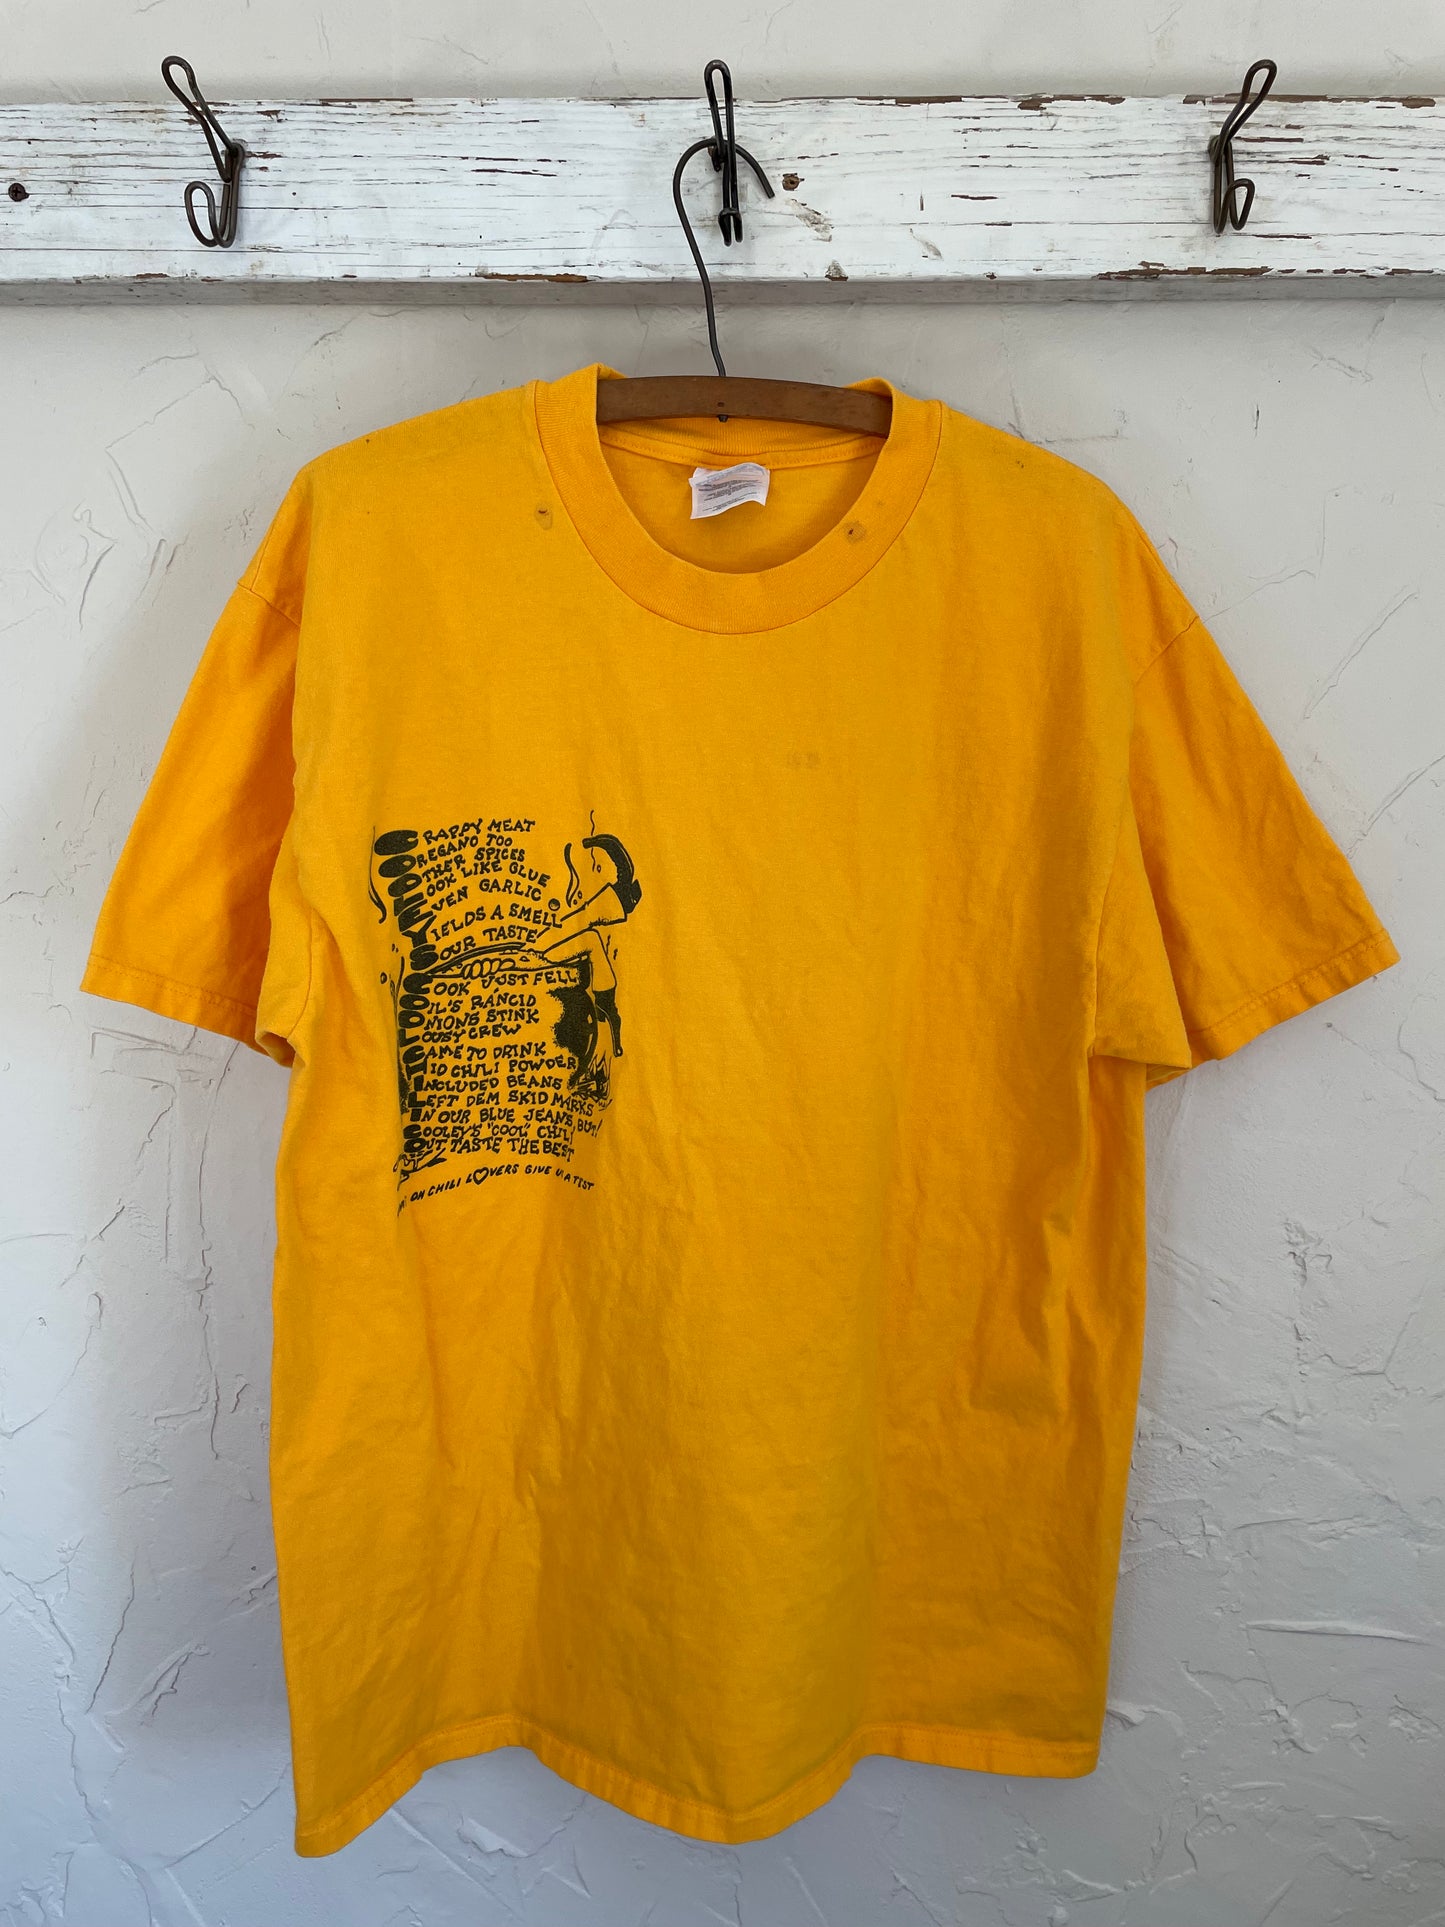 90s Cooley’s Cool Chili Tee